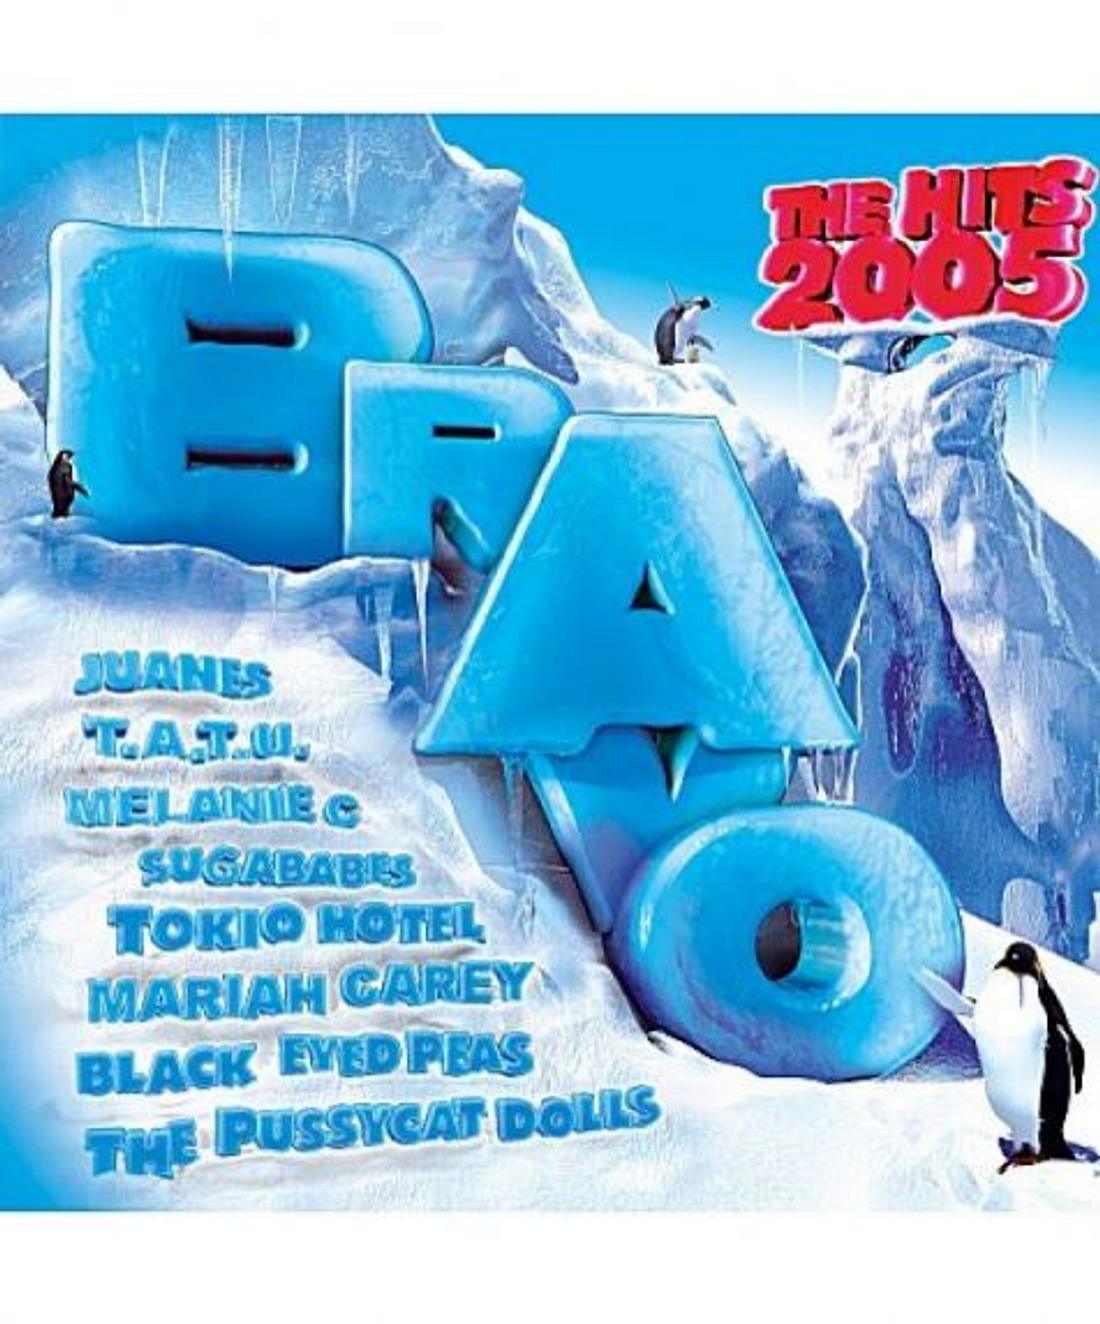 Cool as ice: BRAVO The Hits 2005!